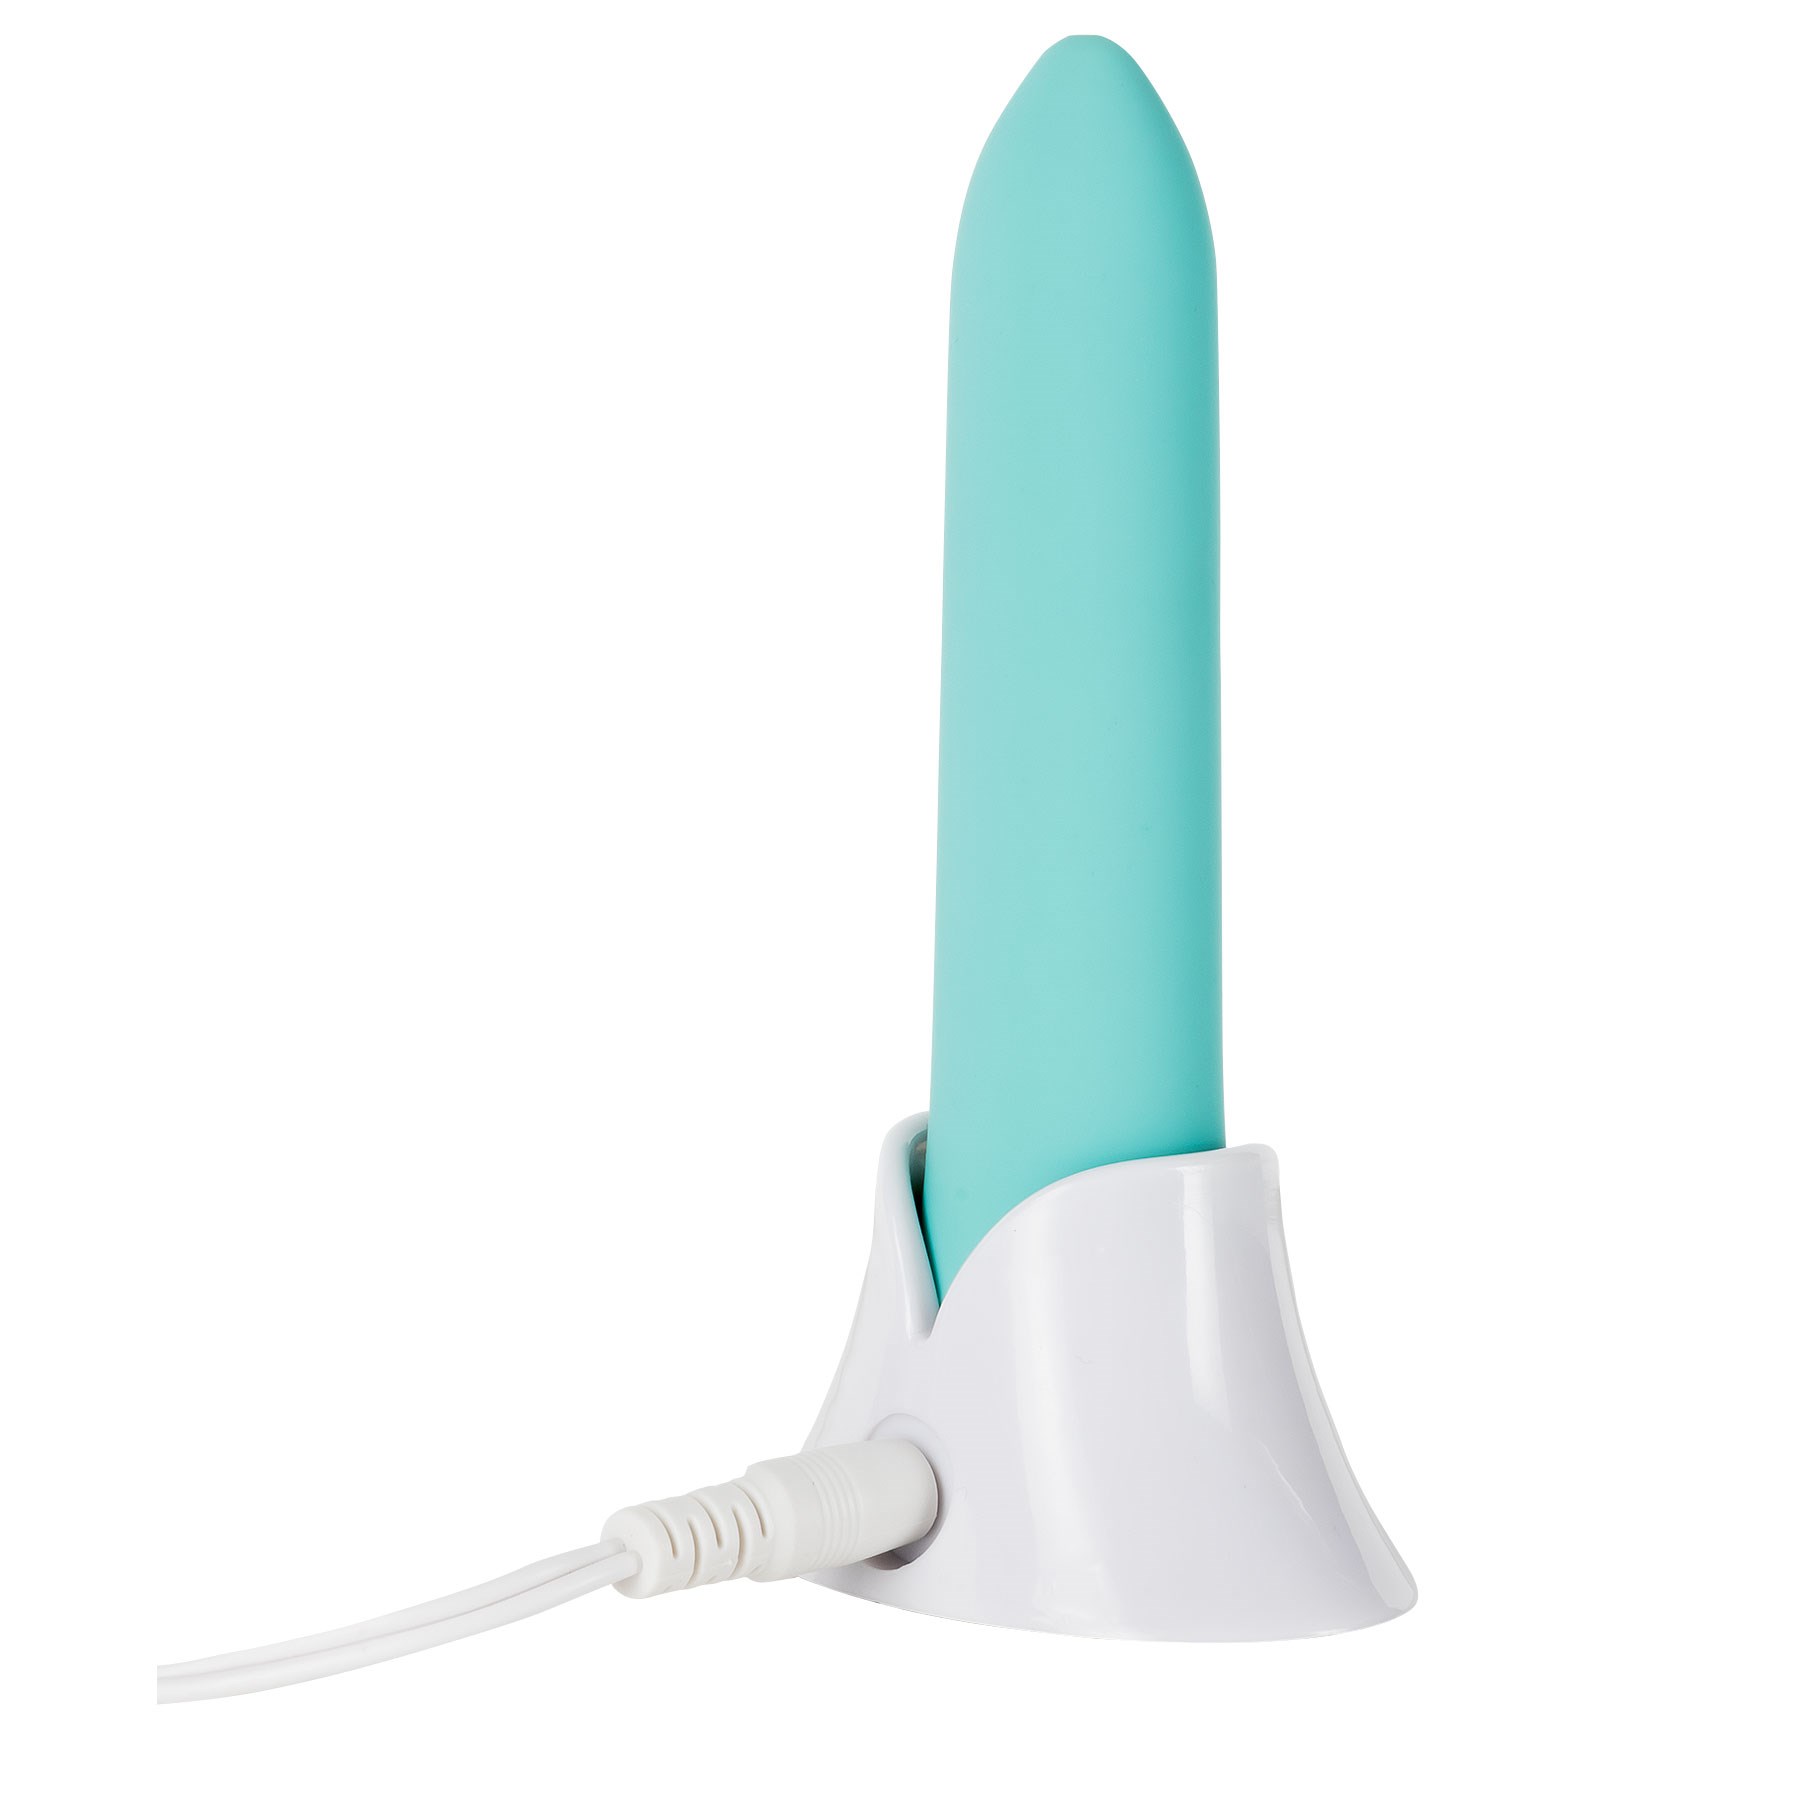 Nu Sensuelle Point Bullet vibe sitting in charger base